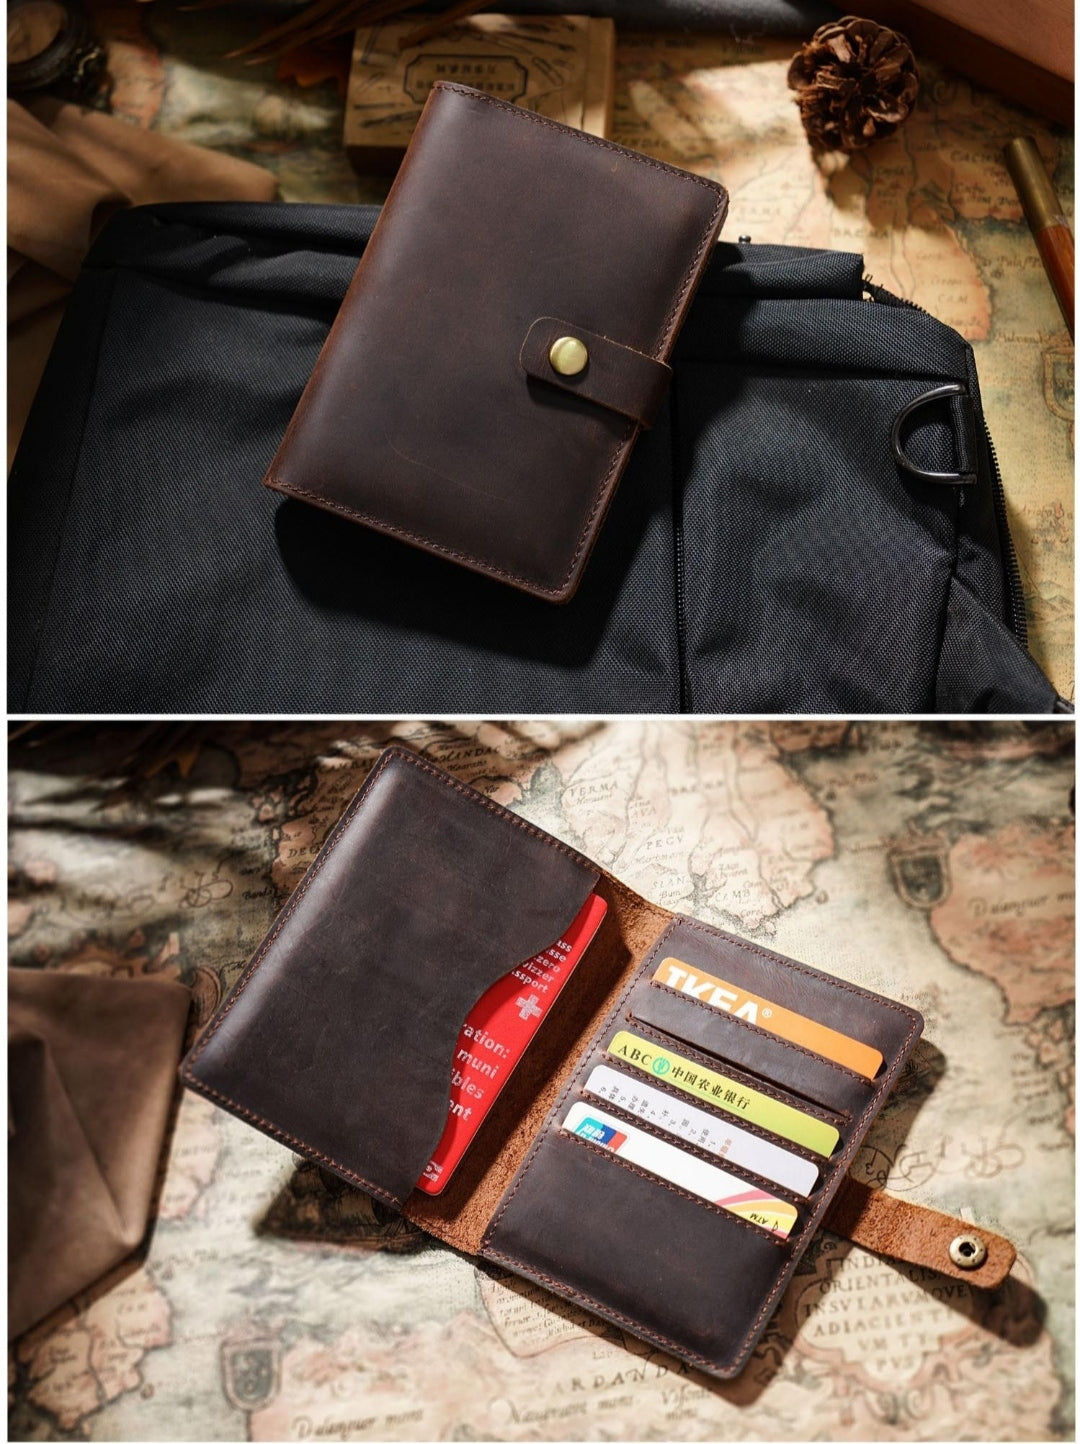 Leather Passport Cover with Card Holder